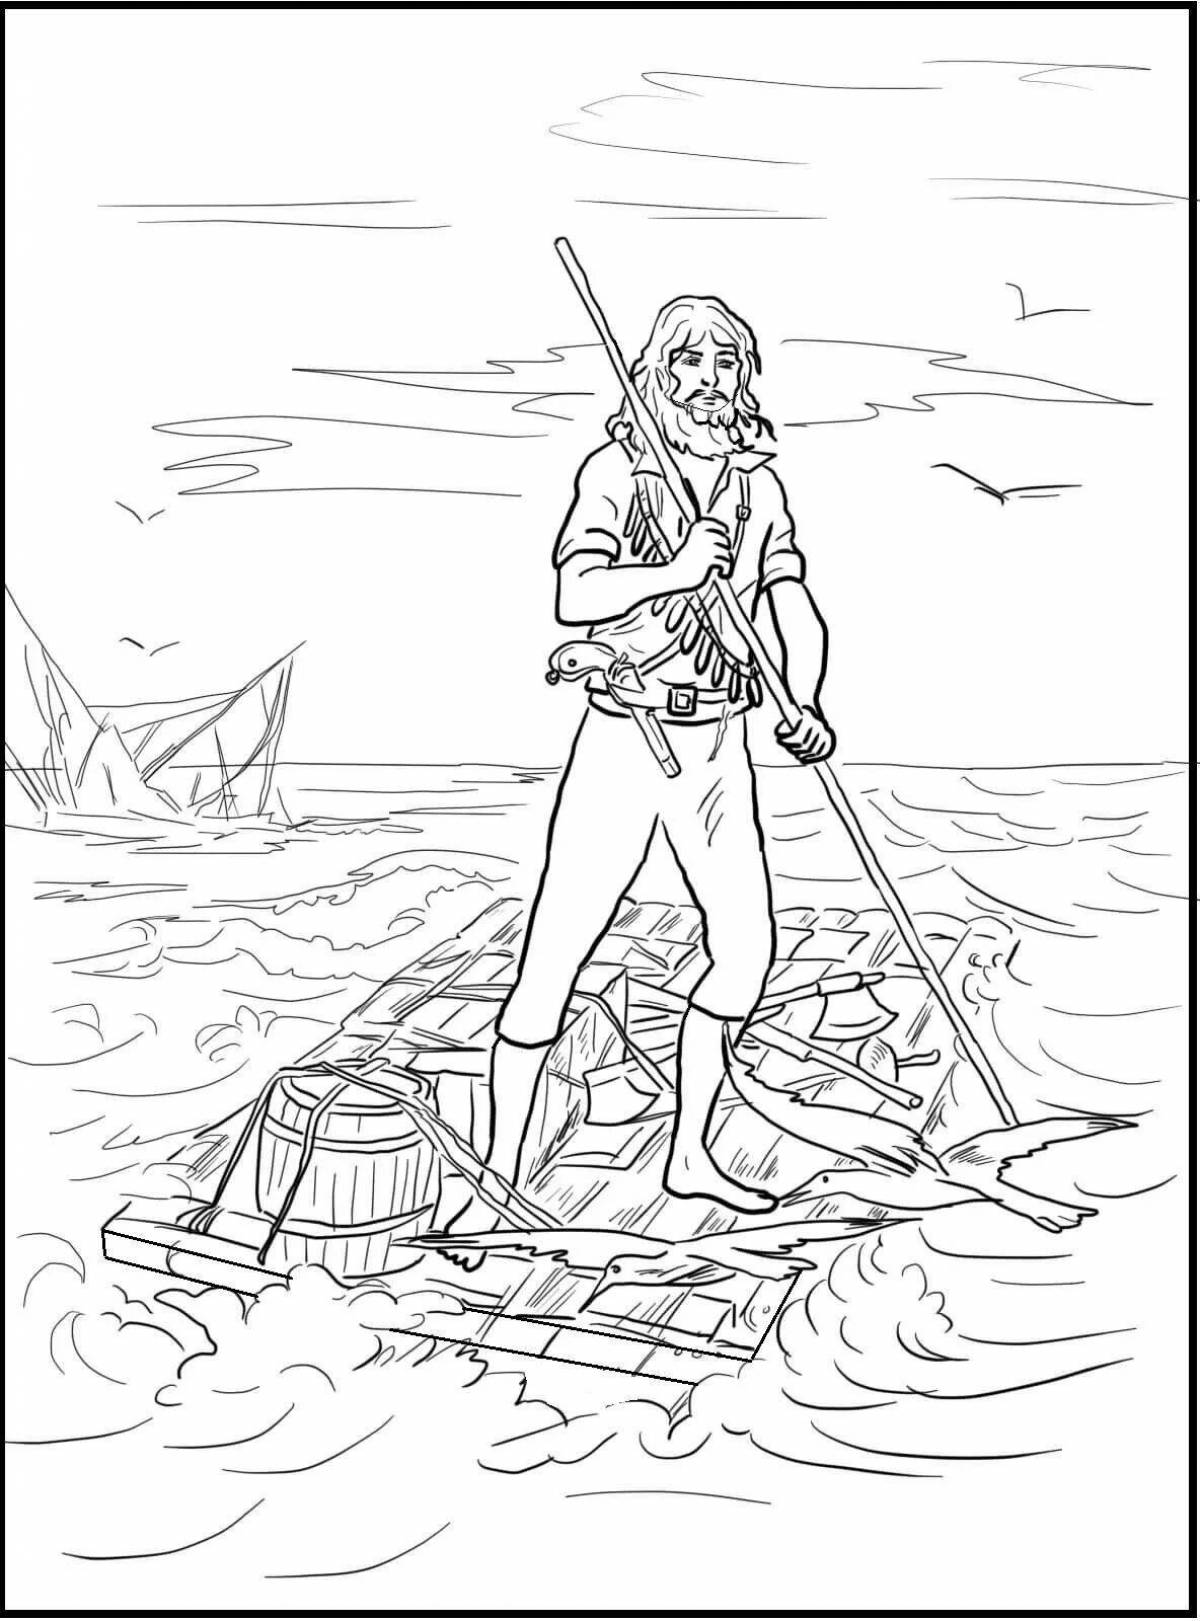 Robinson Crusoe coloring pages